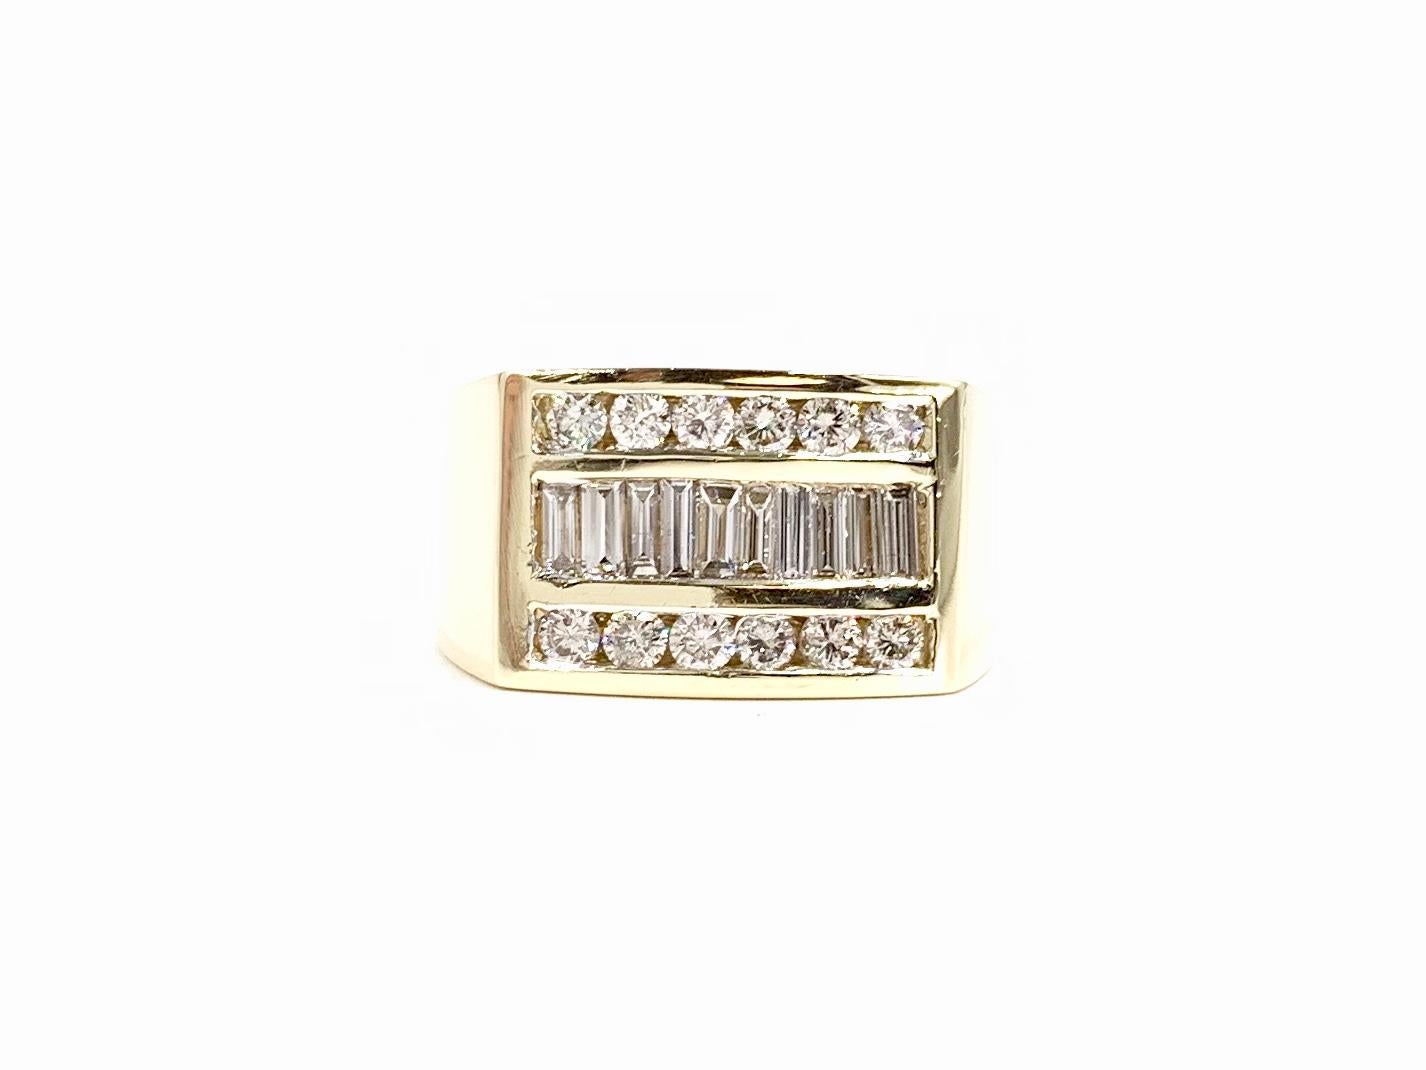 A well made and cleanly designed polished 14 karat yellow gold three row diamond gents ring featuring 12 round brilliant and 10 baguette cut diamonds at approximately 1.10 carats total weight. Diamond quality is approximately G-H color, SI1-SI2